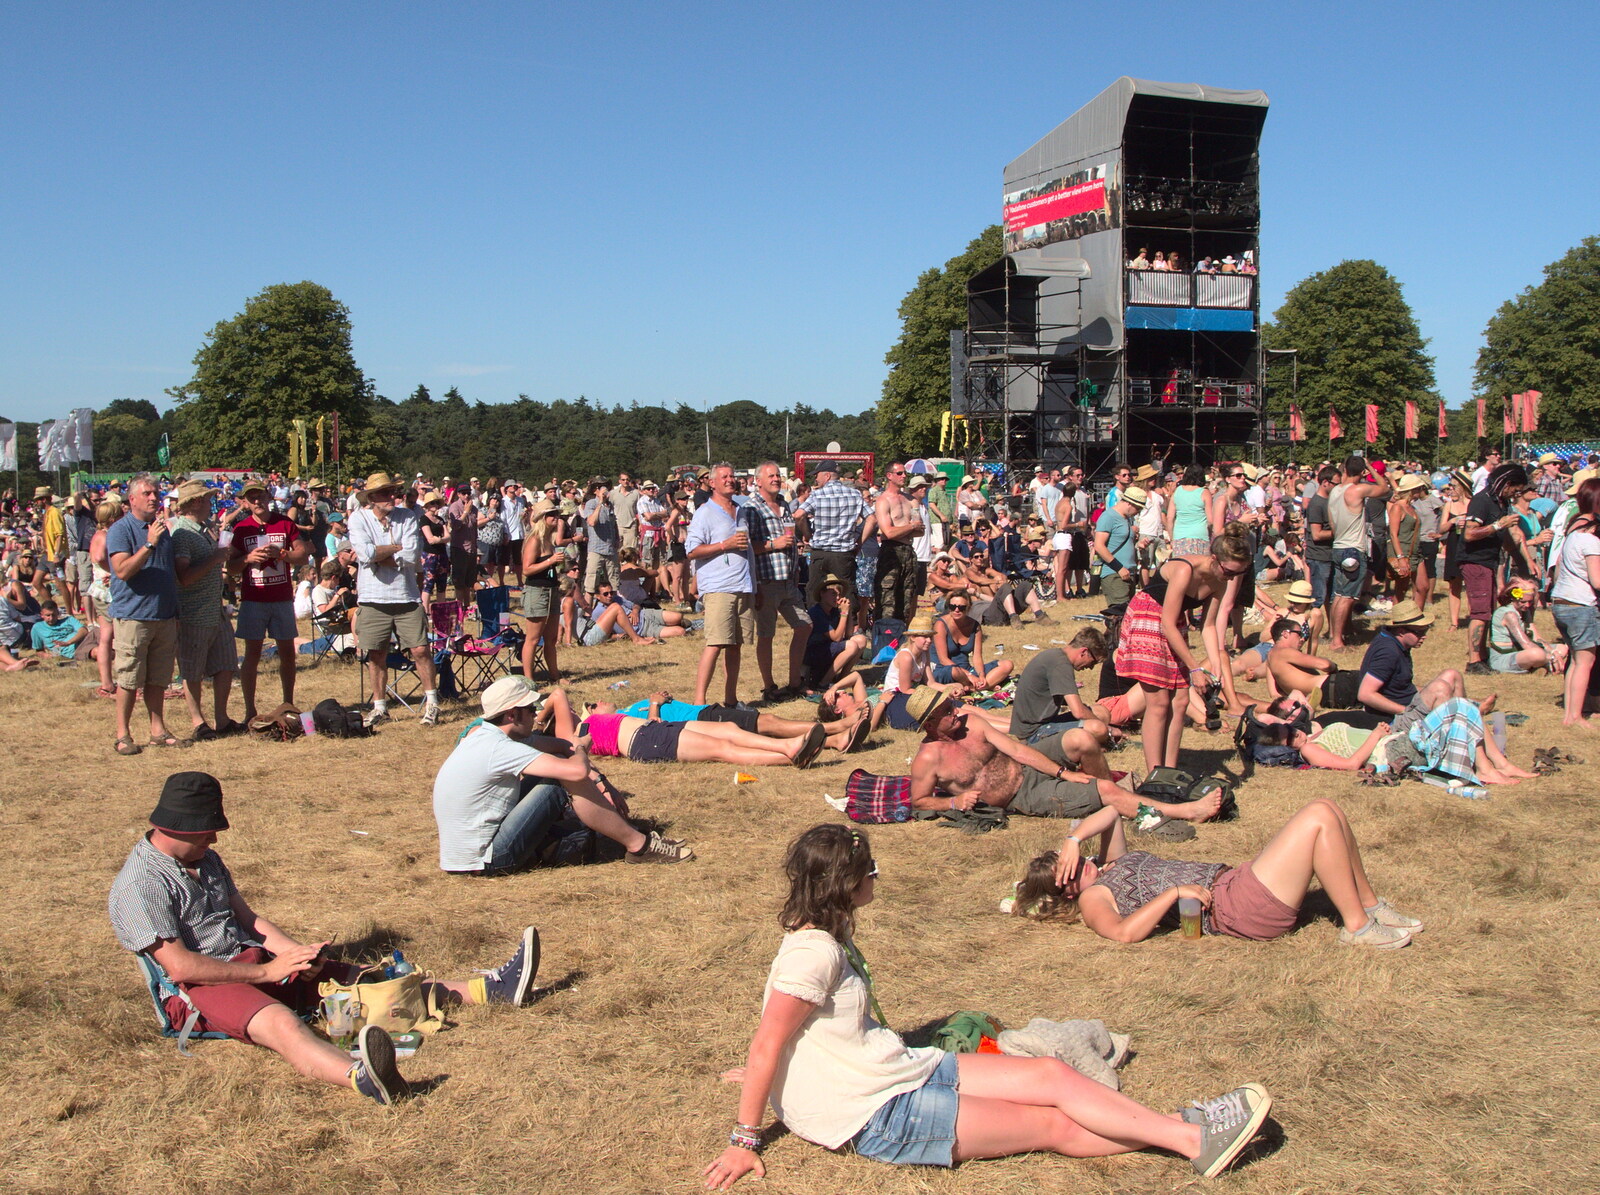 Festival crowds from The 8th Latitude Festival, Henham Park, Southwold, Suffolk - 18th July 2013